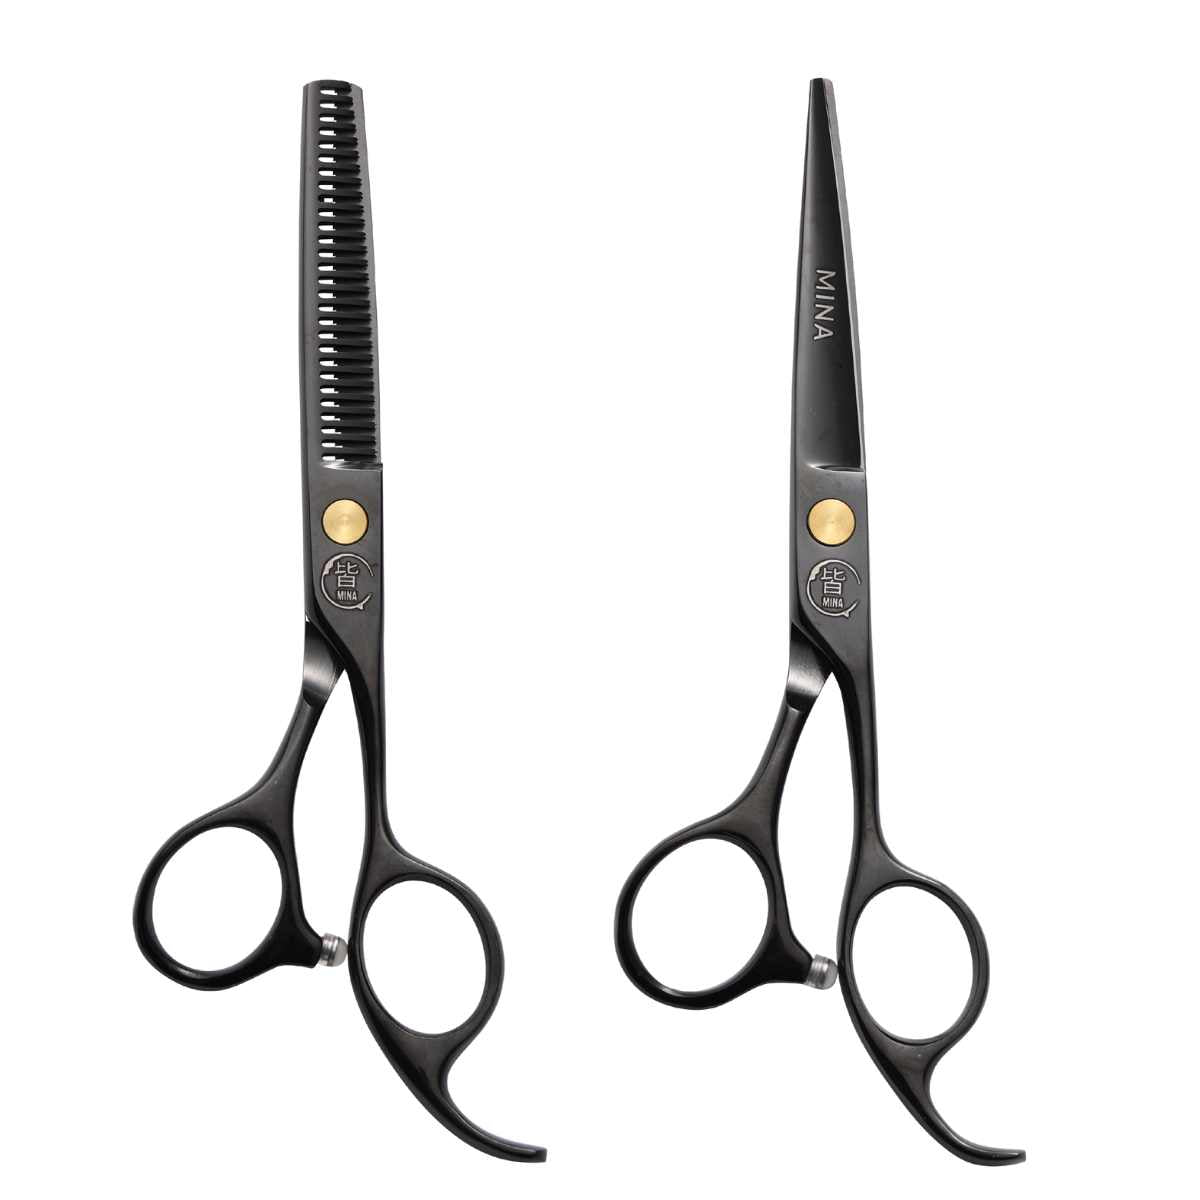  JW CBK Matte Black Professional Hair Cutting Shear (5.25  Inches) : Beauty & Personal Care